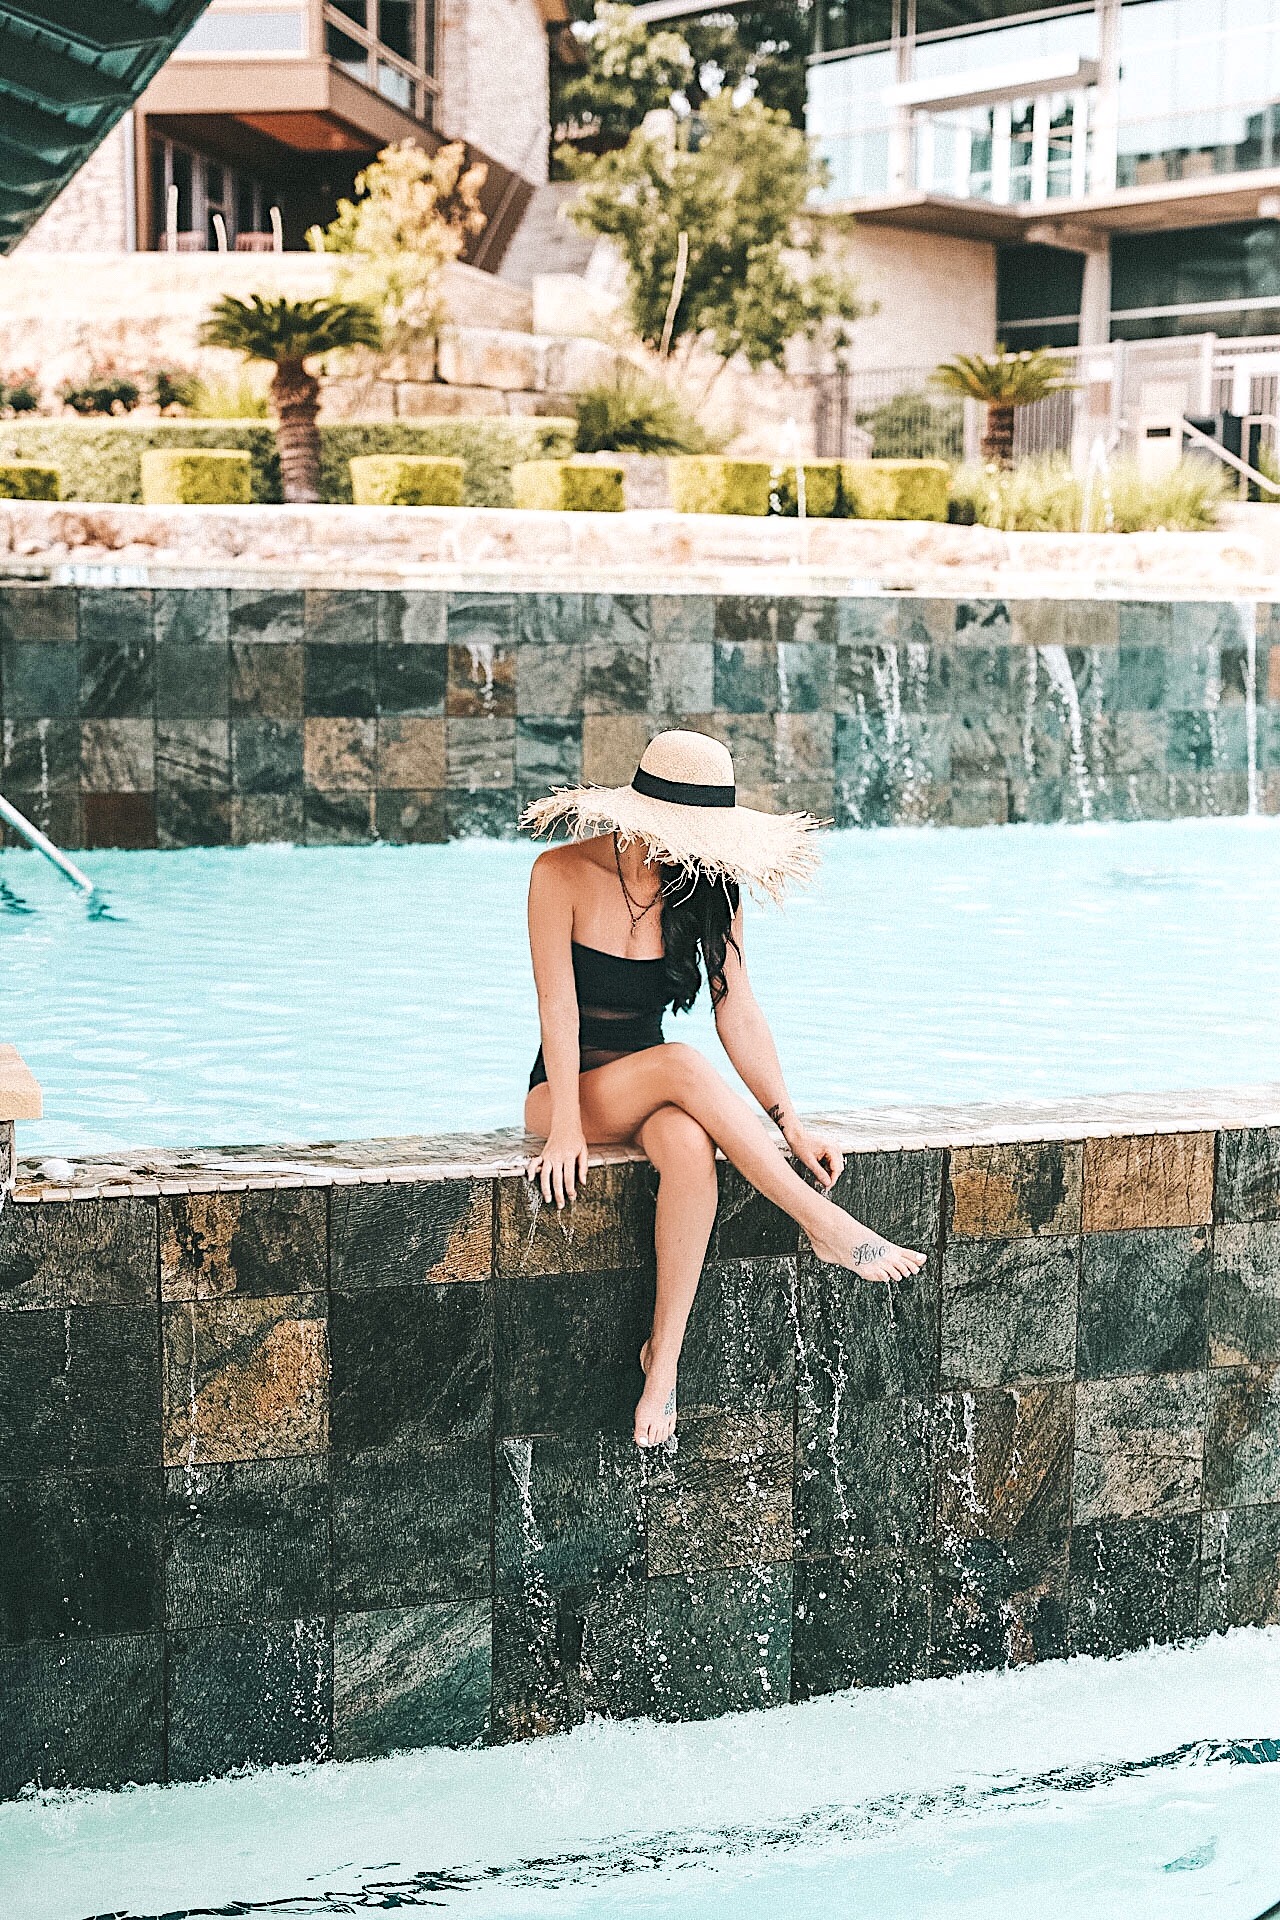 12 Must Have Neutral One Piece Swimsuits for Summer | swimsuit style for summer | summer swimsuits for women | one-piece bathing suits for women || Dressed to Kill #summer #style #fashion #swimsuits #bathingsuits #onepiece 